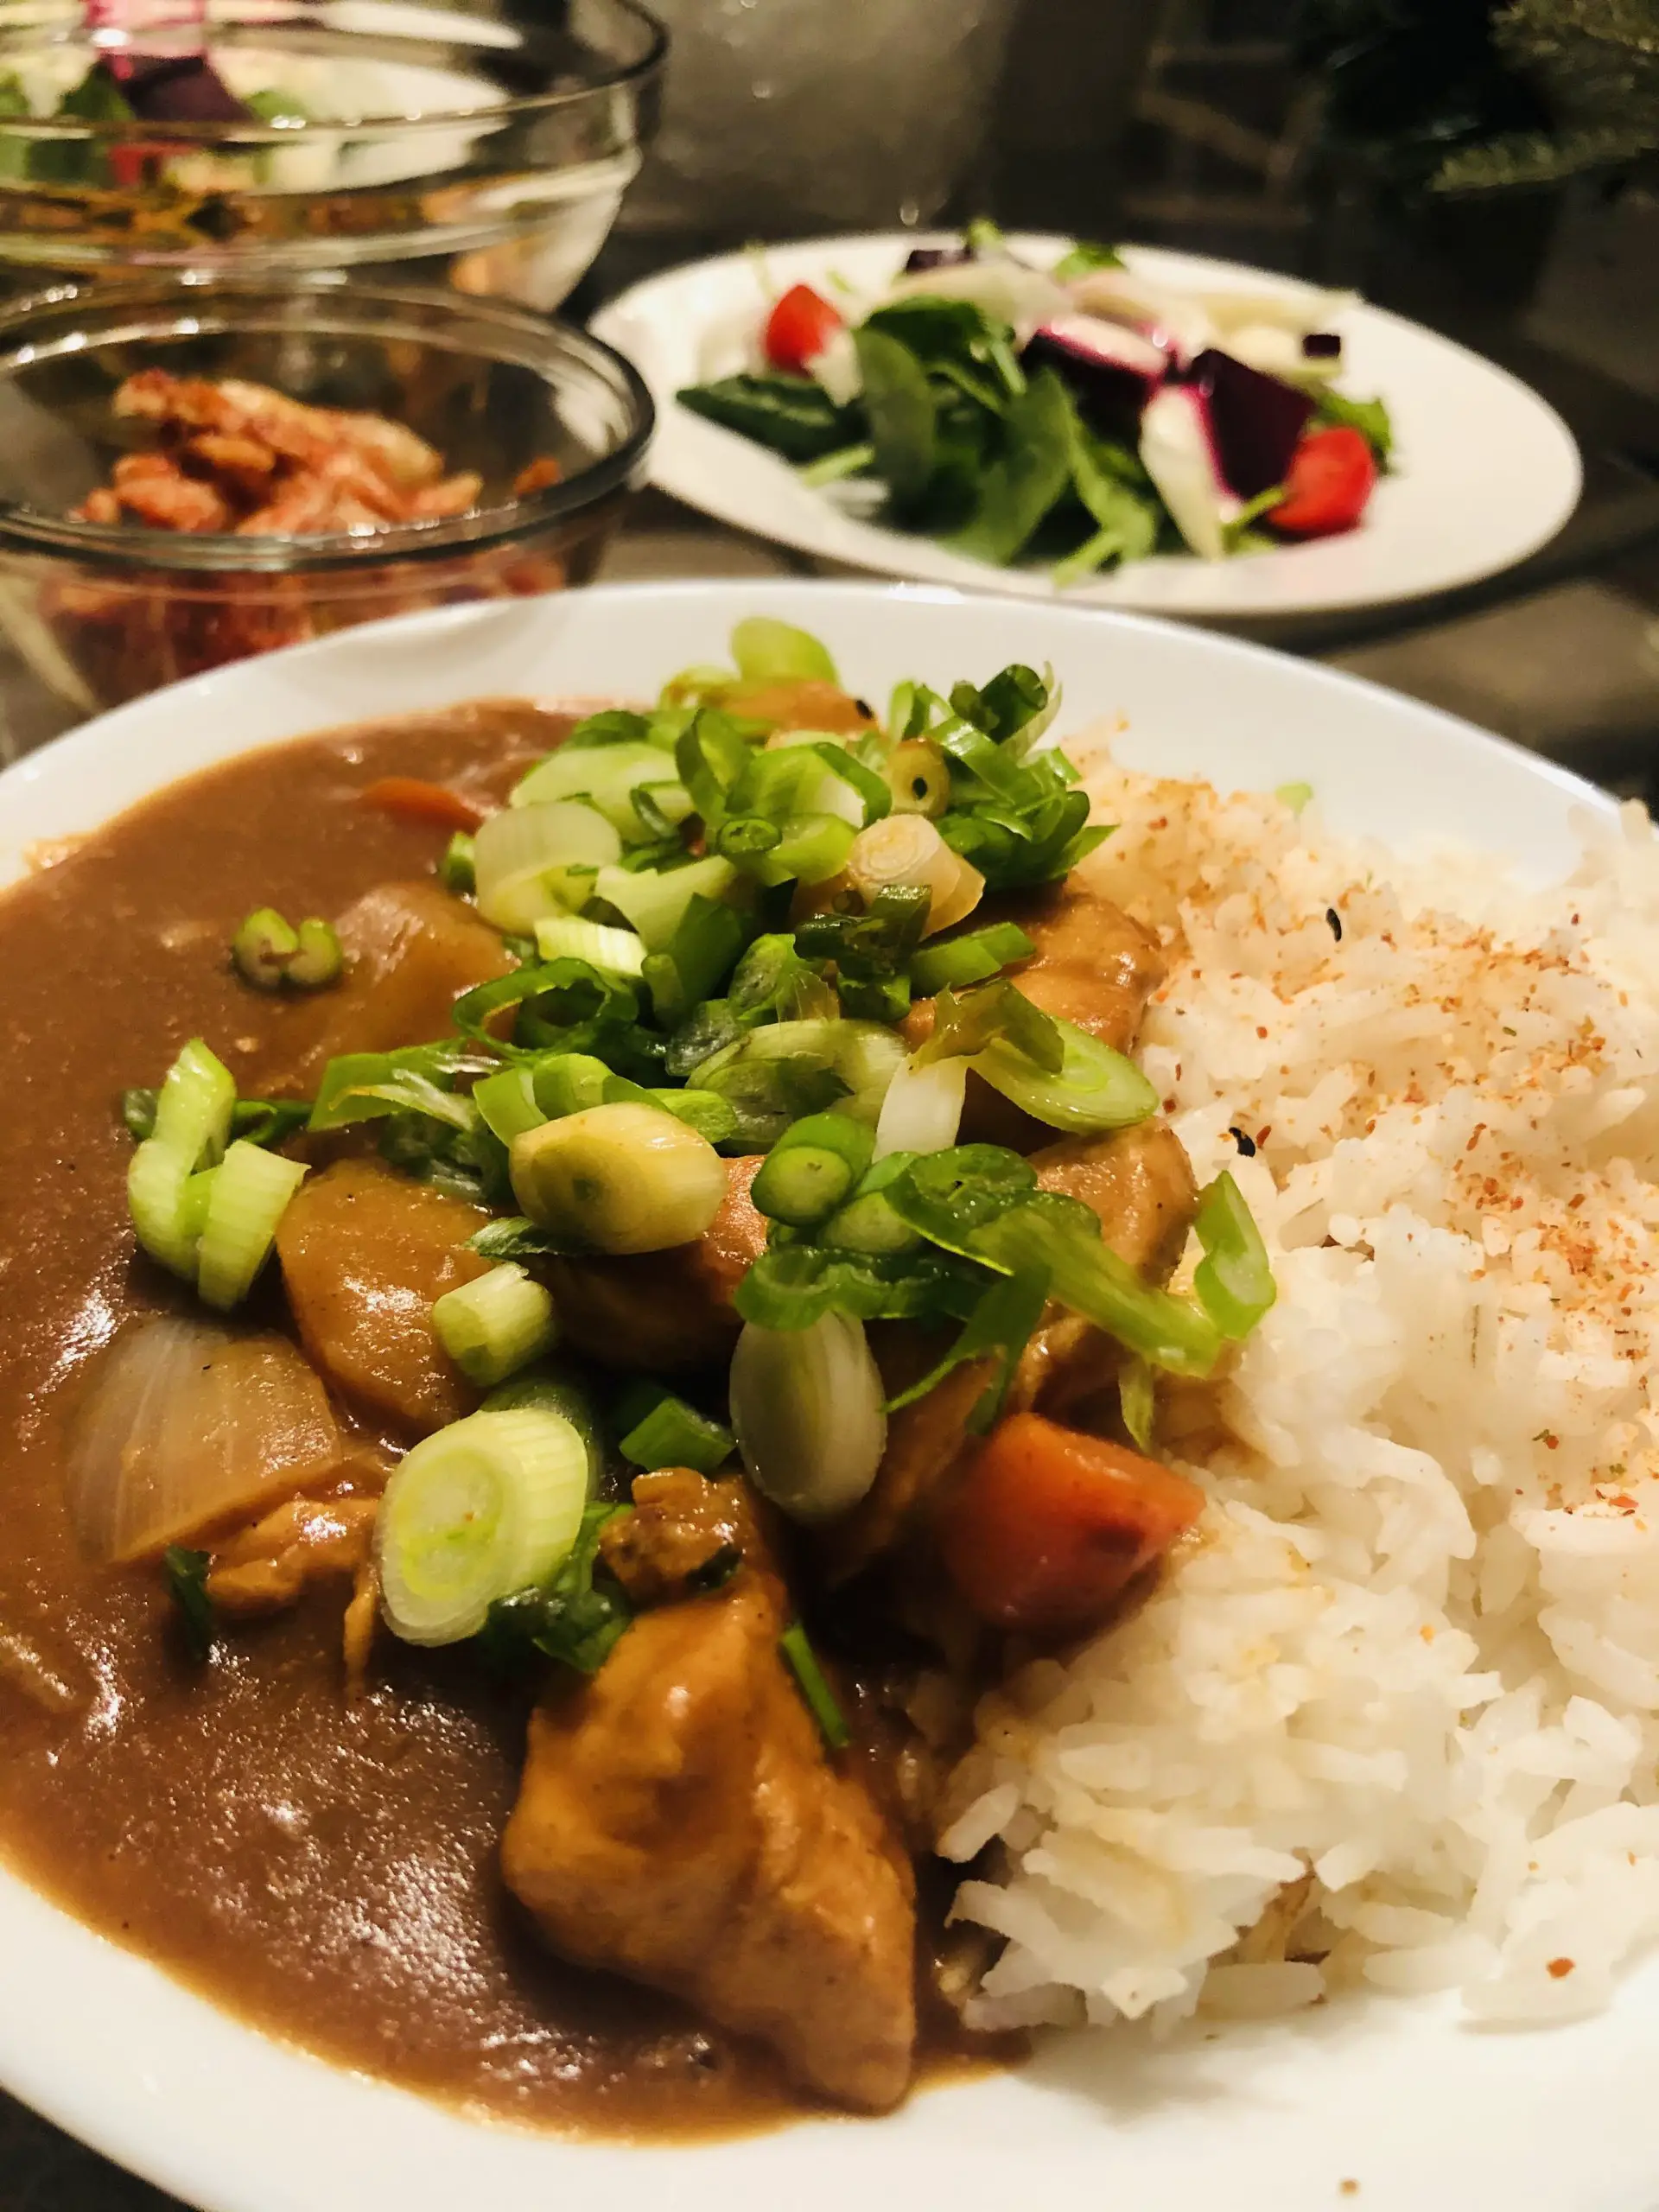 Vermont Curry With Chicken served with rice and garnished with green onions, with kimchi and a salad in the background